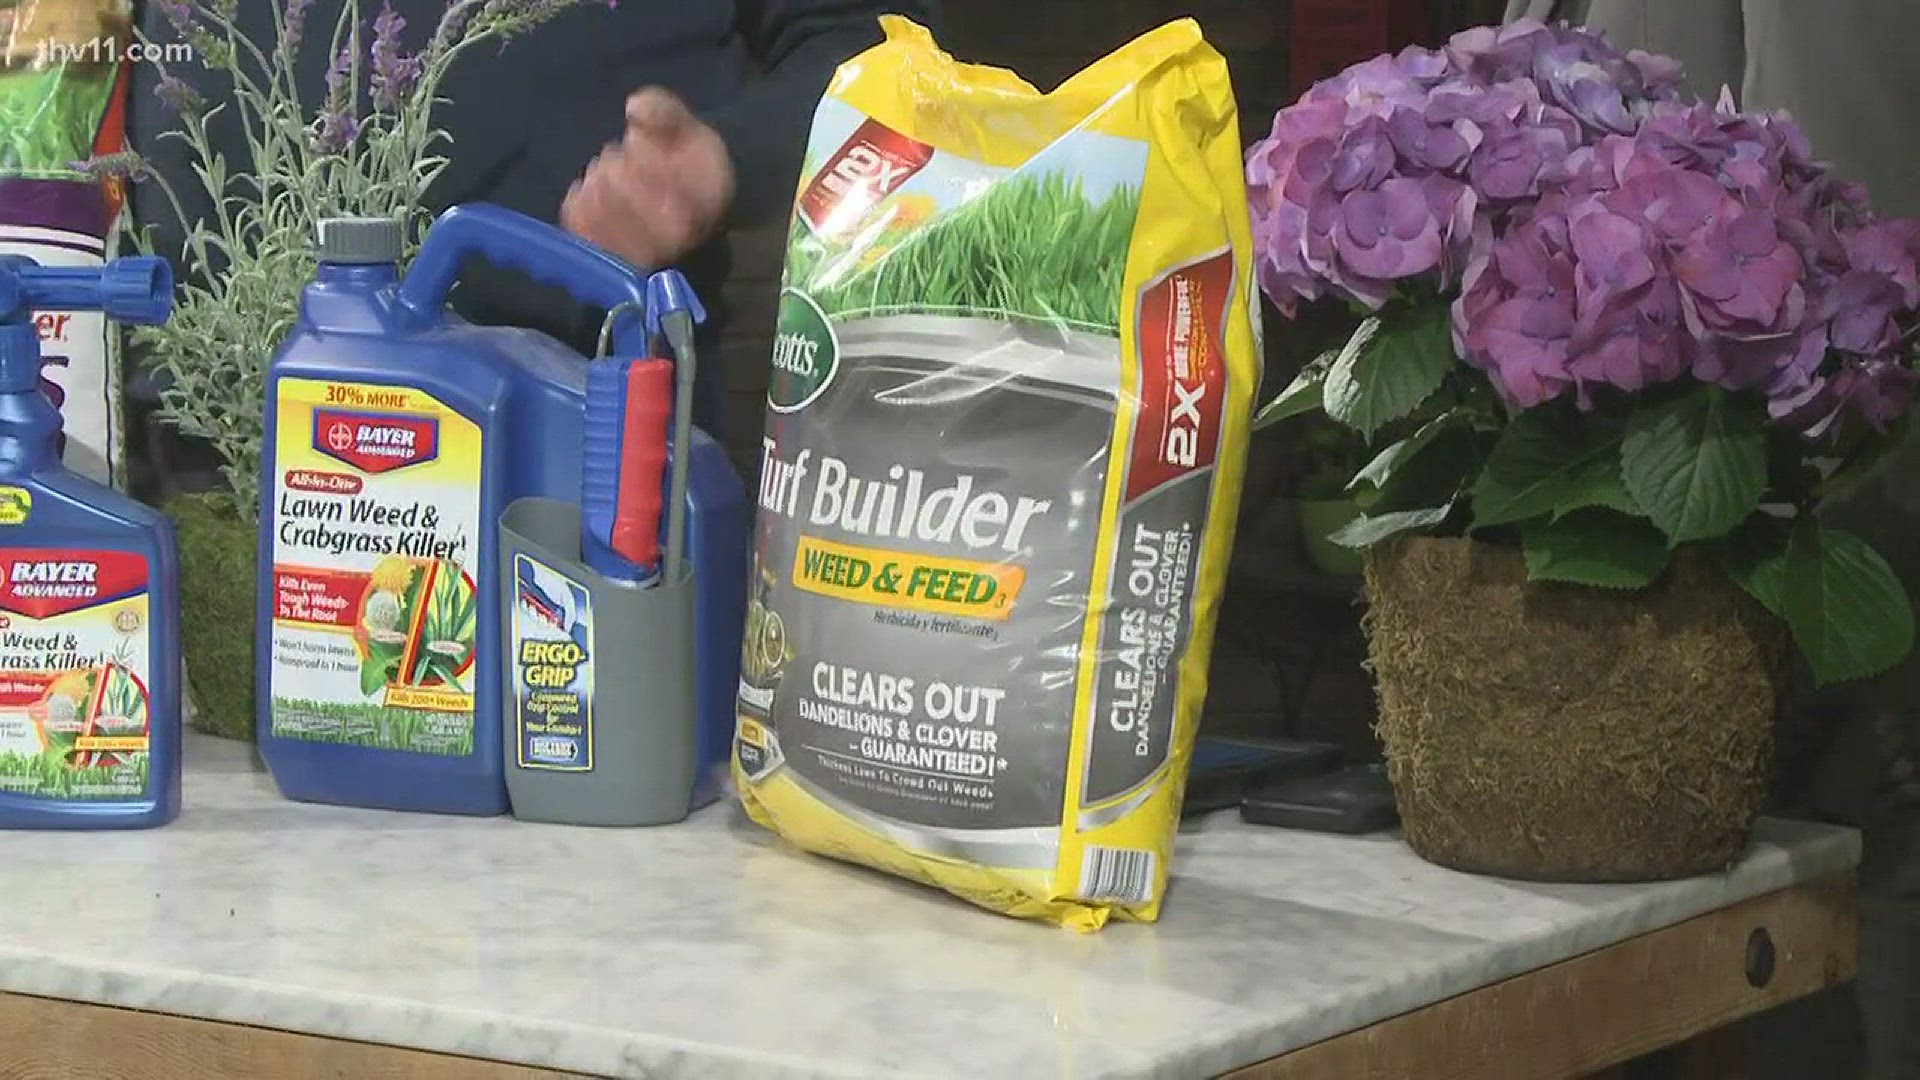 Chris H. Olsen joined THV11 on Home and Garden Wednesday to talk about weeds